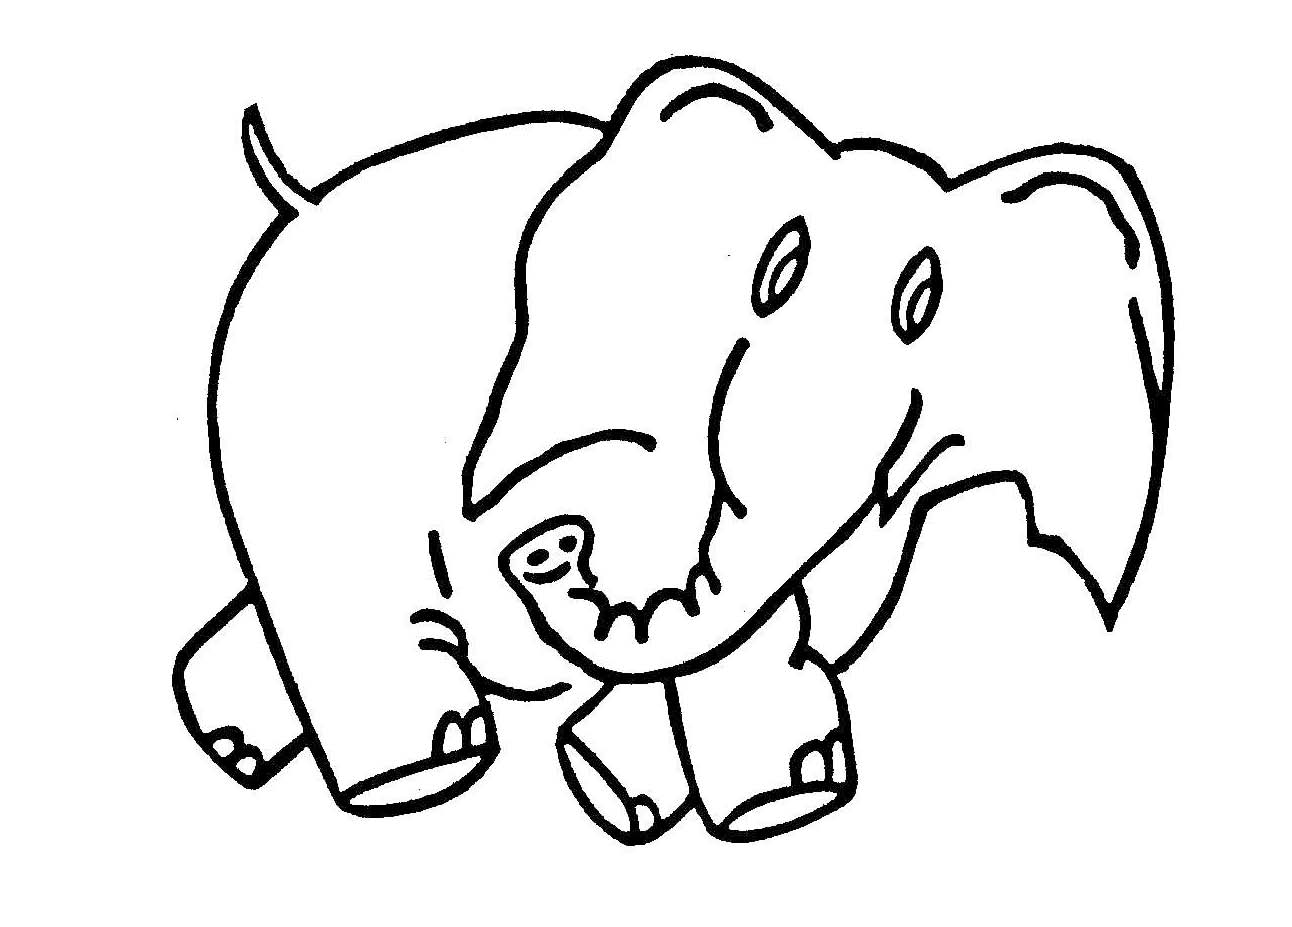 Elephant Drawings For Kids - ClipArt Best